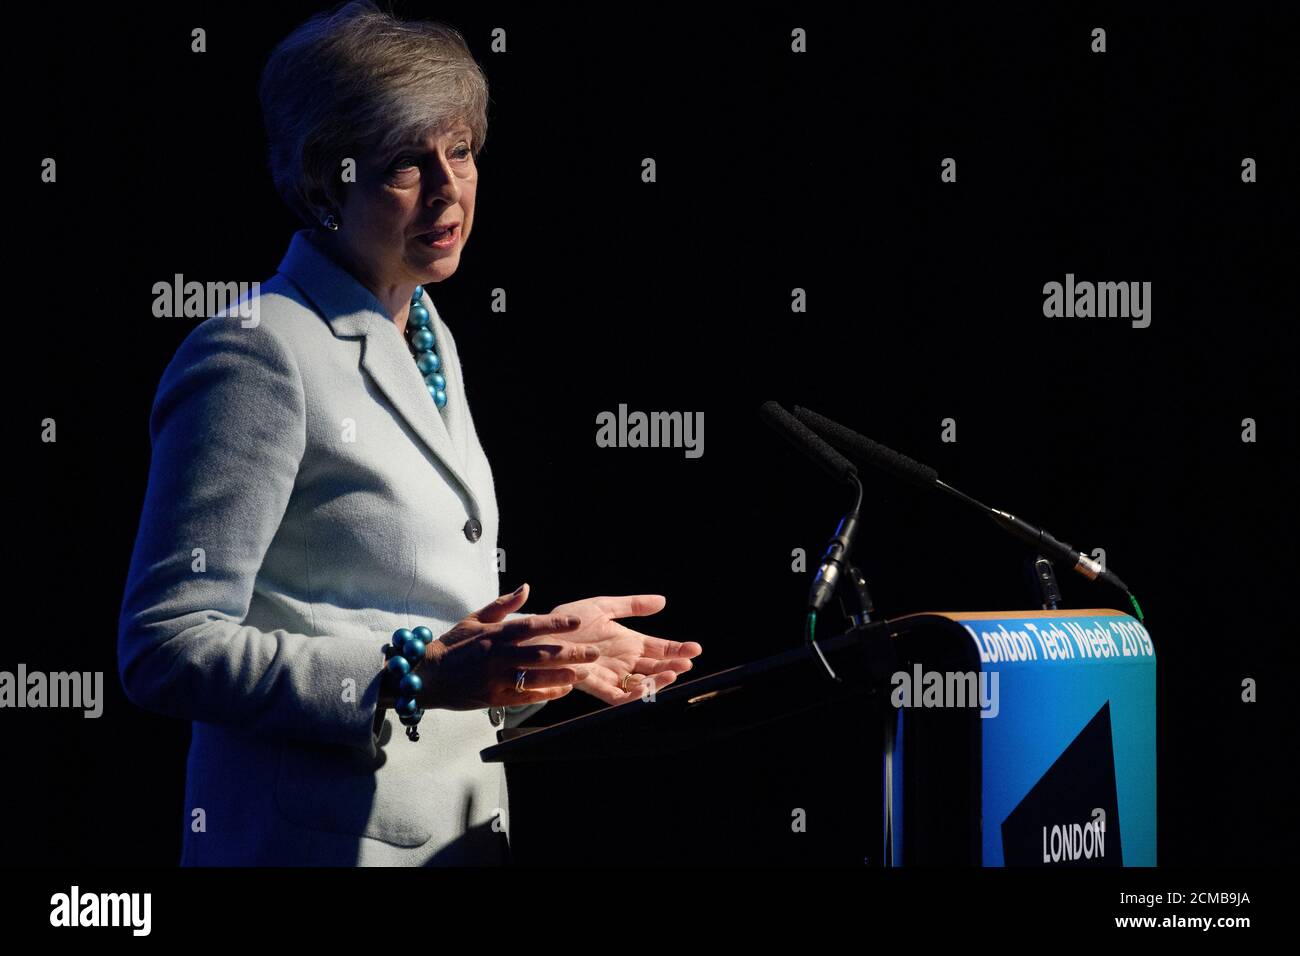 Britain's Prime Minister Theresa May addresses guests with a speech to mark the start of London Tech Week in London, Britain June 10, 2019. Leon Neal/Pool via REUTERS Stock Photo